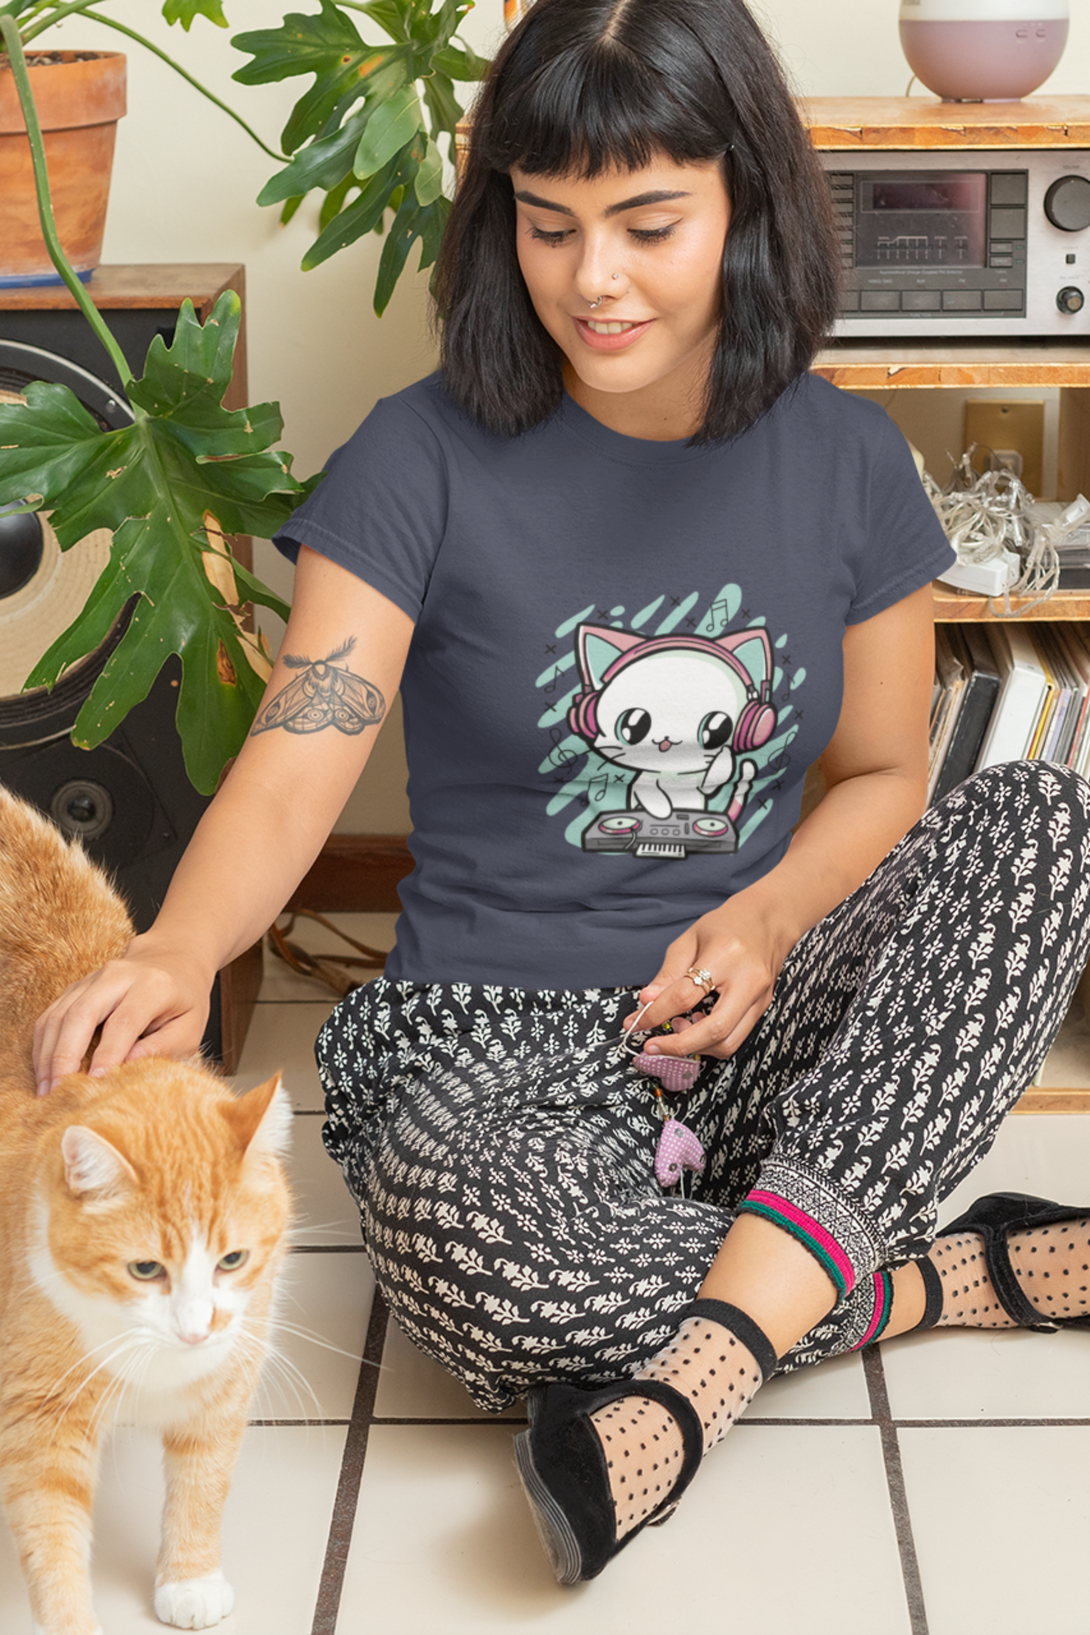 Meow Mix Printed T-Shirt For Women - WowWaves - 5